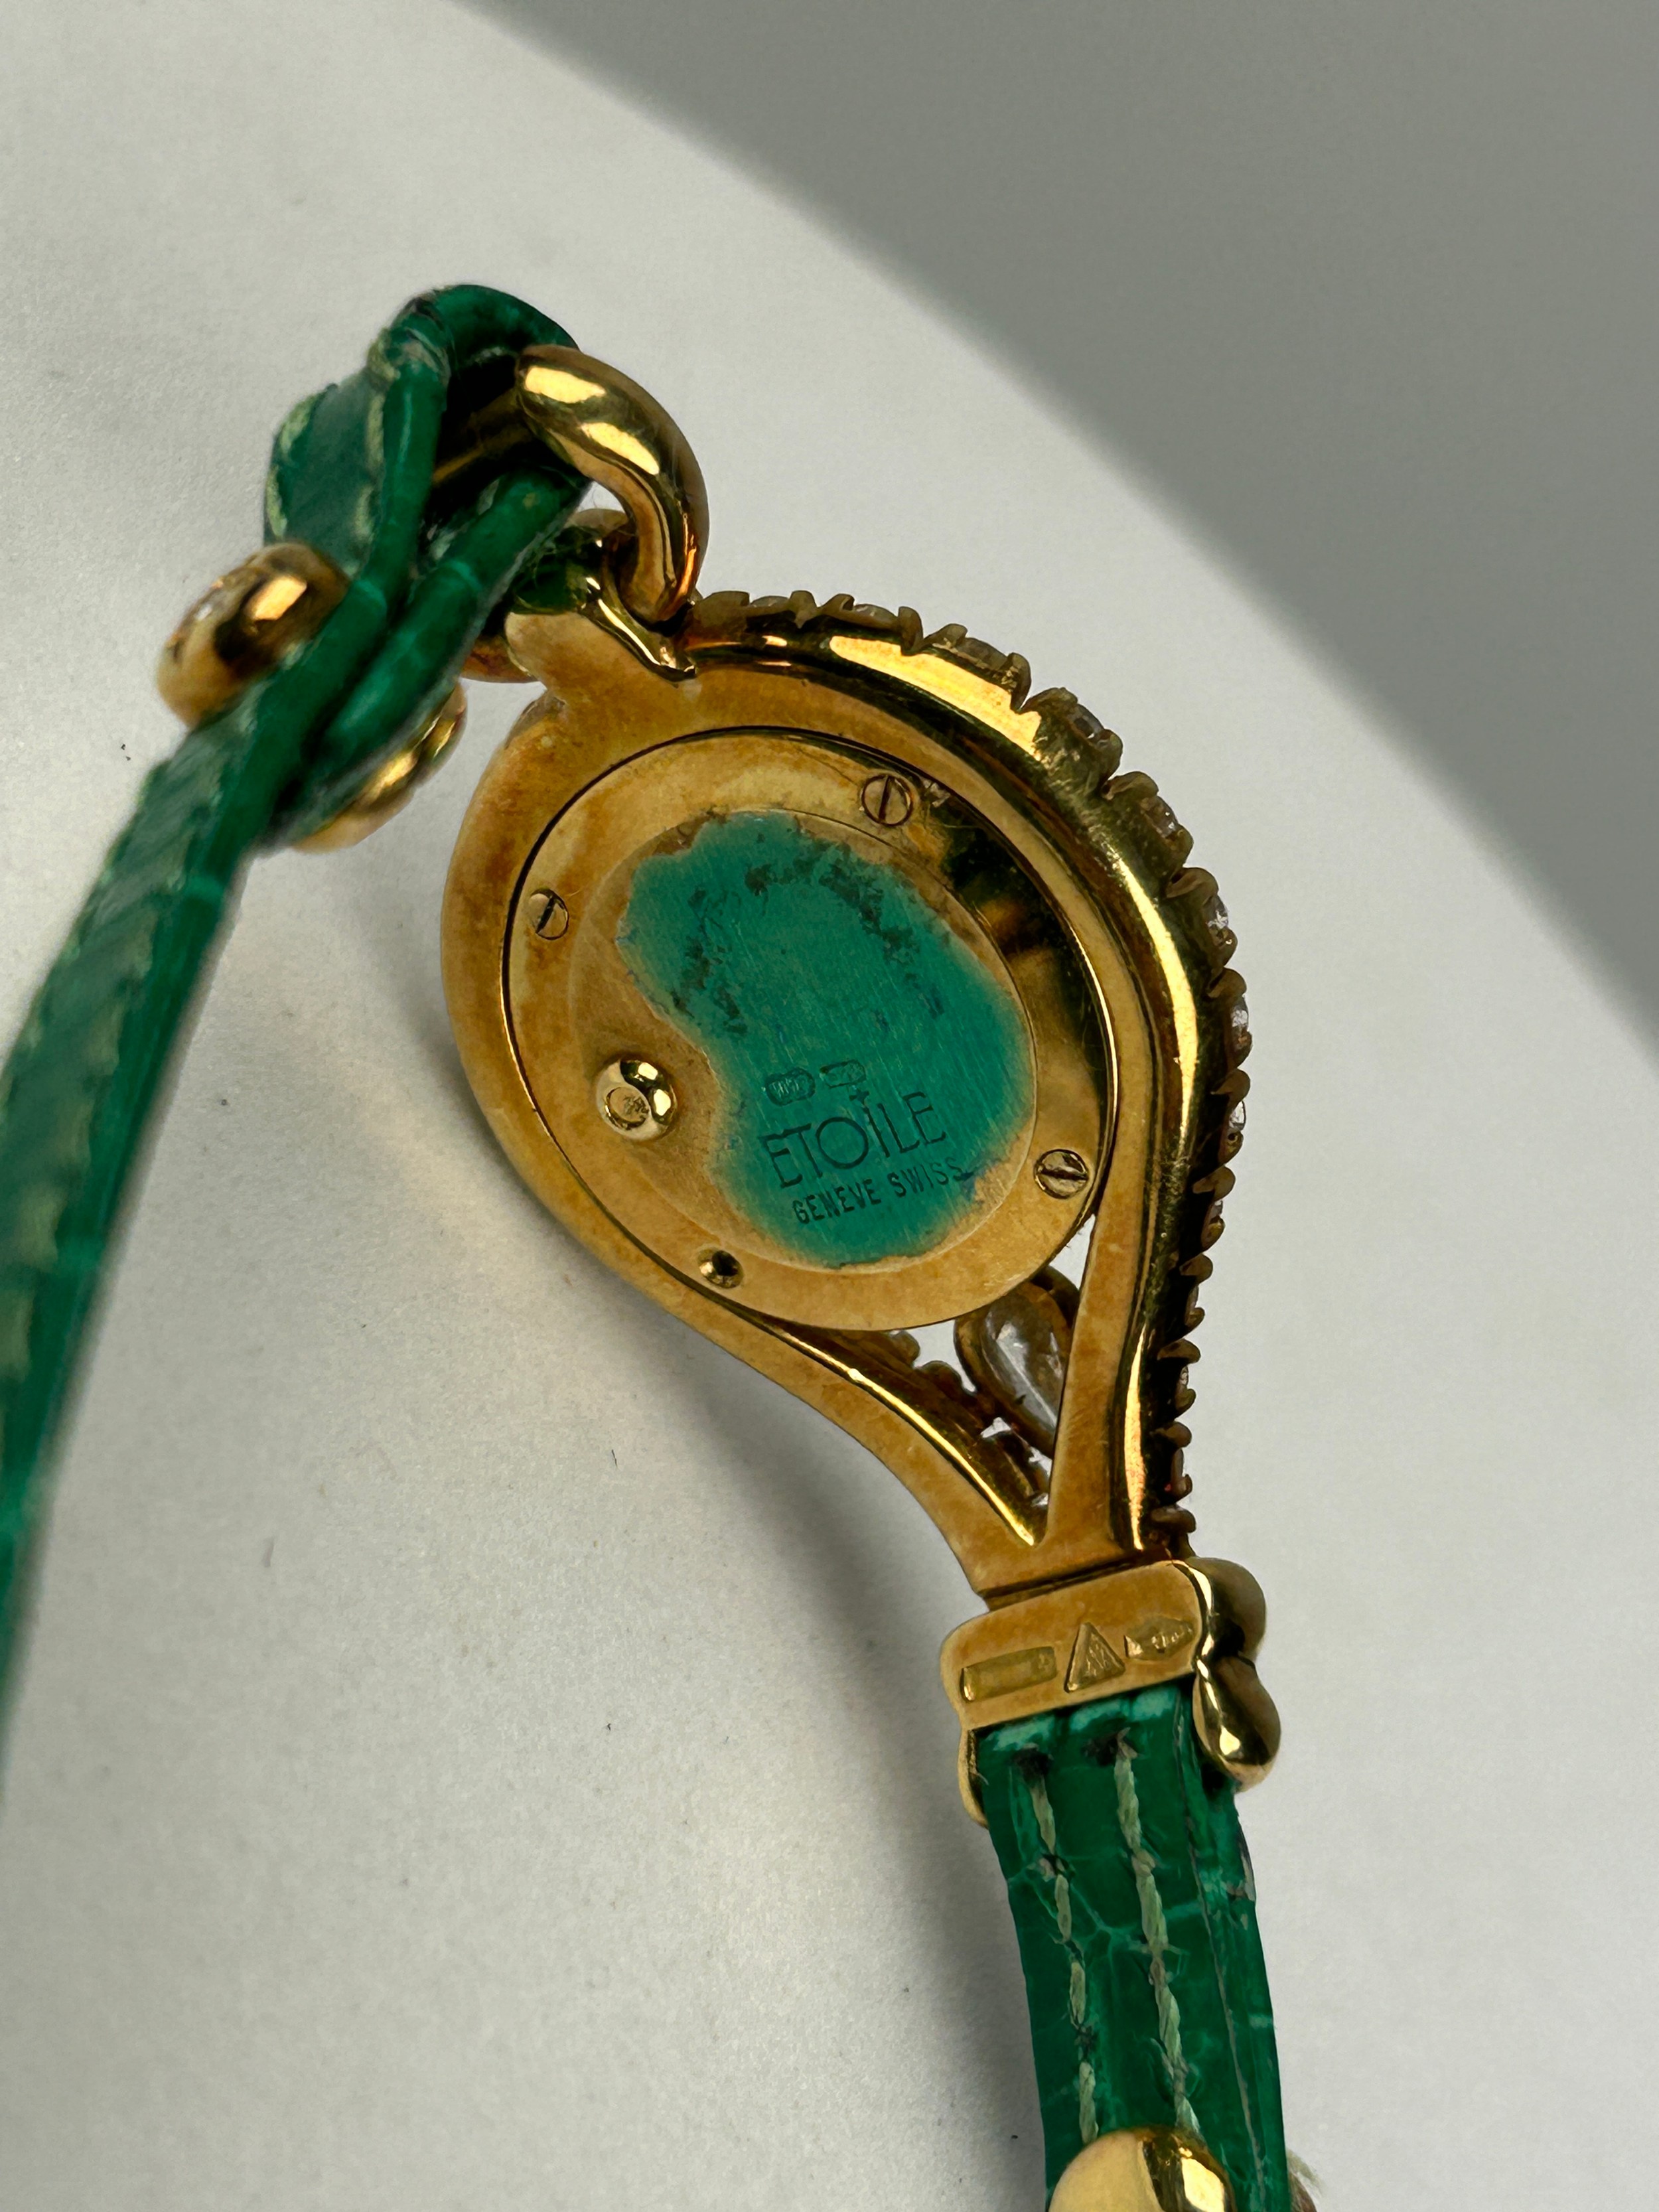 A DIAMOND ETOILE WATCH APPROXIMATELY THREE CARATS IN 14CT GOLD WITH GREEN LEATHER STRAP, - Image 5 of 5